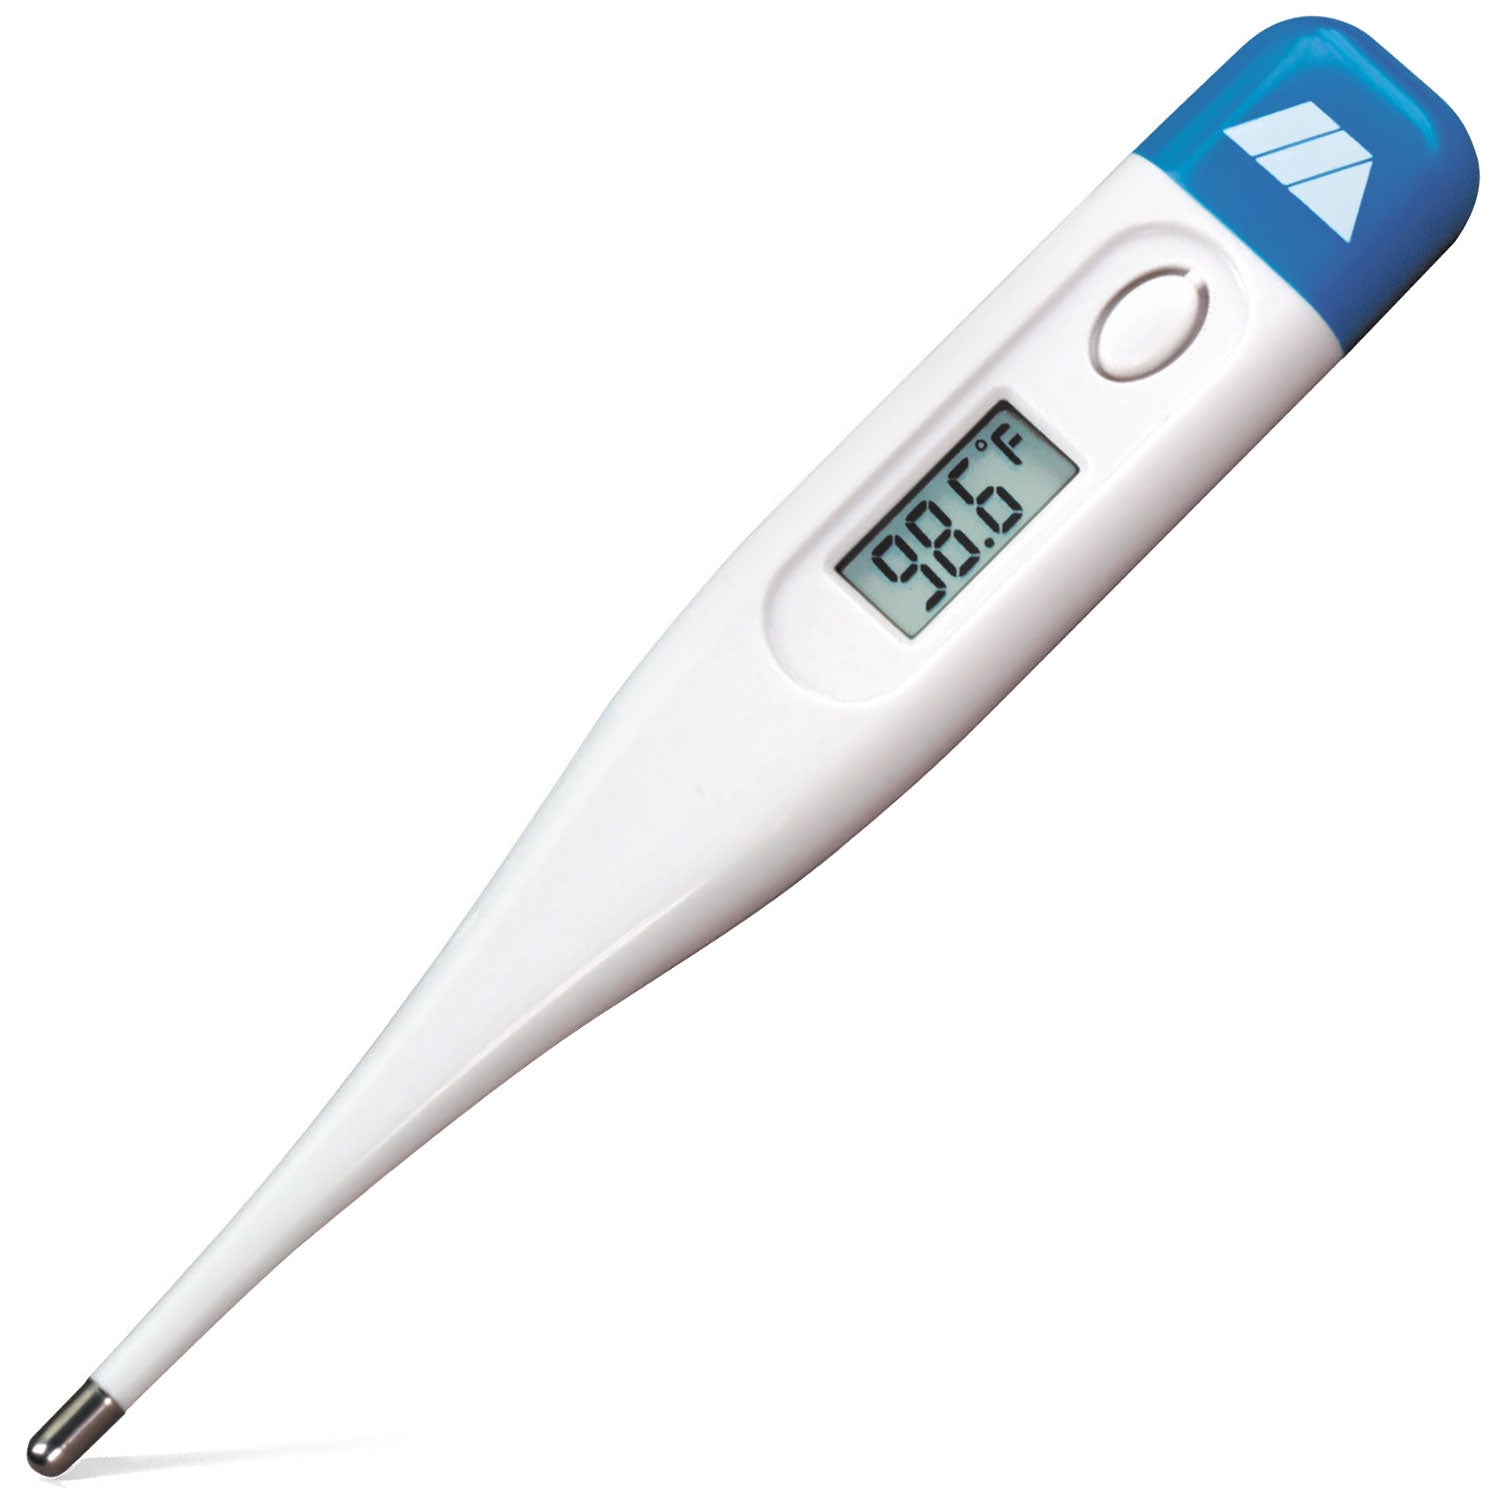 Mabis Clinically Accurate Digital Thermometer with Storage Case